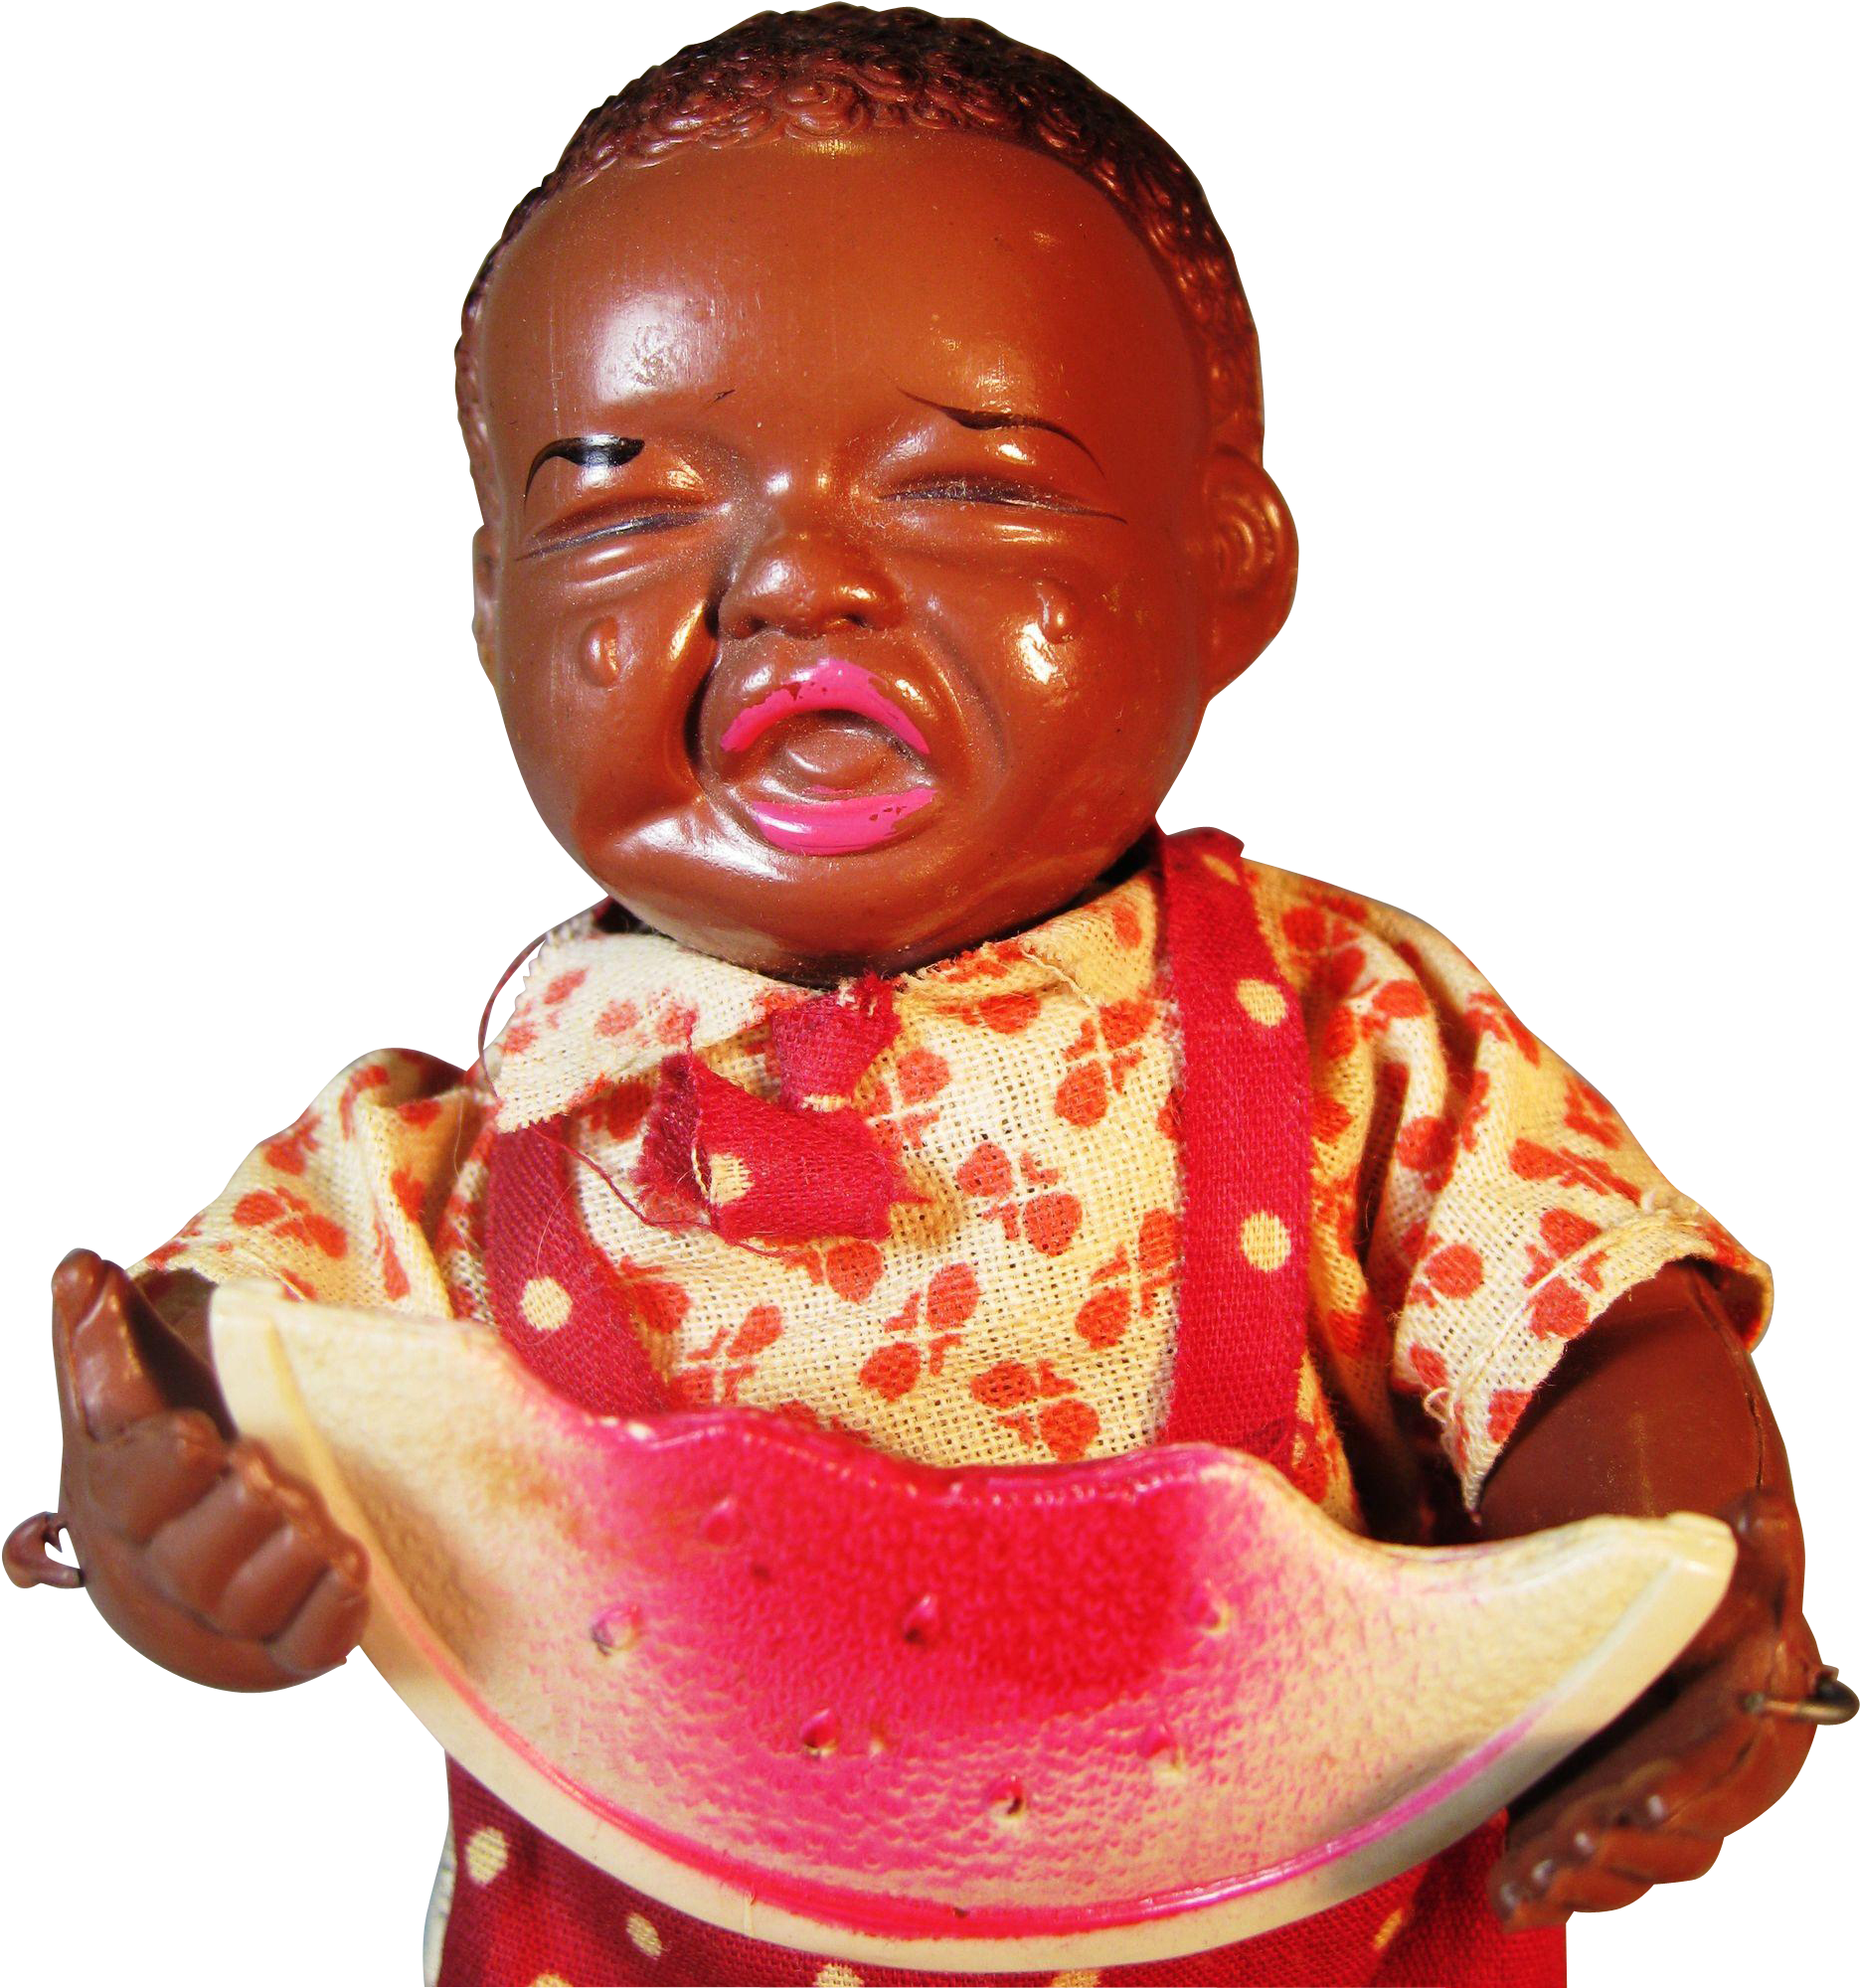 Vintage Crying Doll With Watermelon Slice